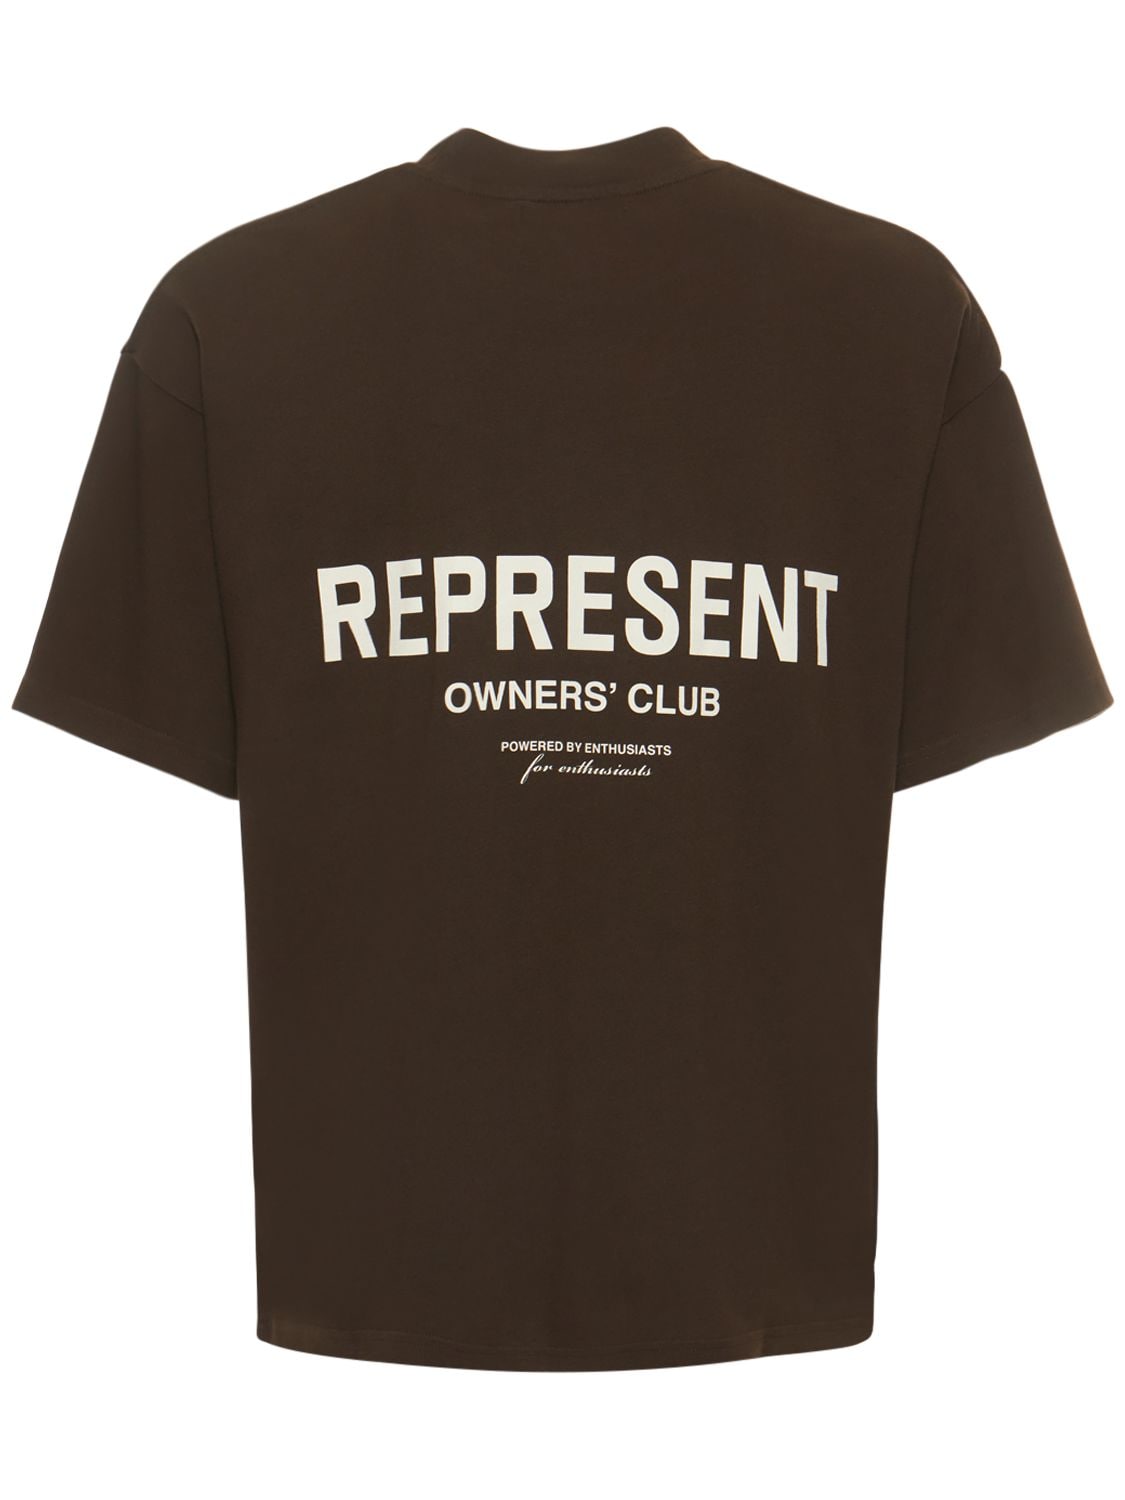 REPRESENT OWNERS CLUB LOGO COTTON T-SHIRT